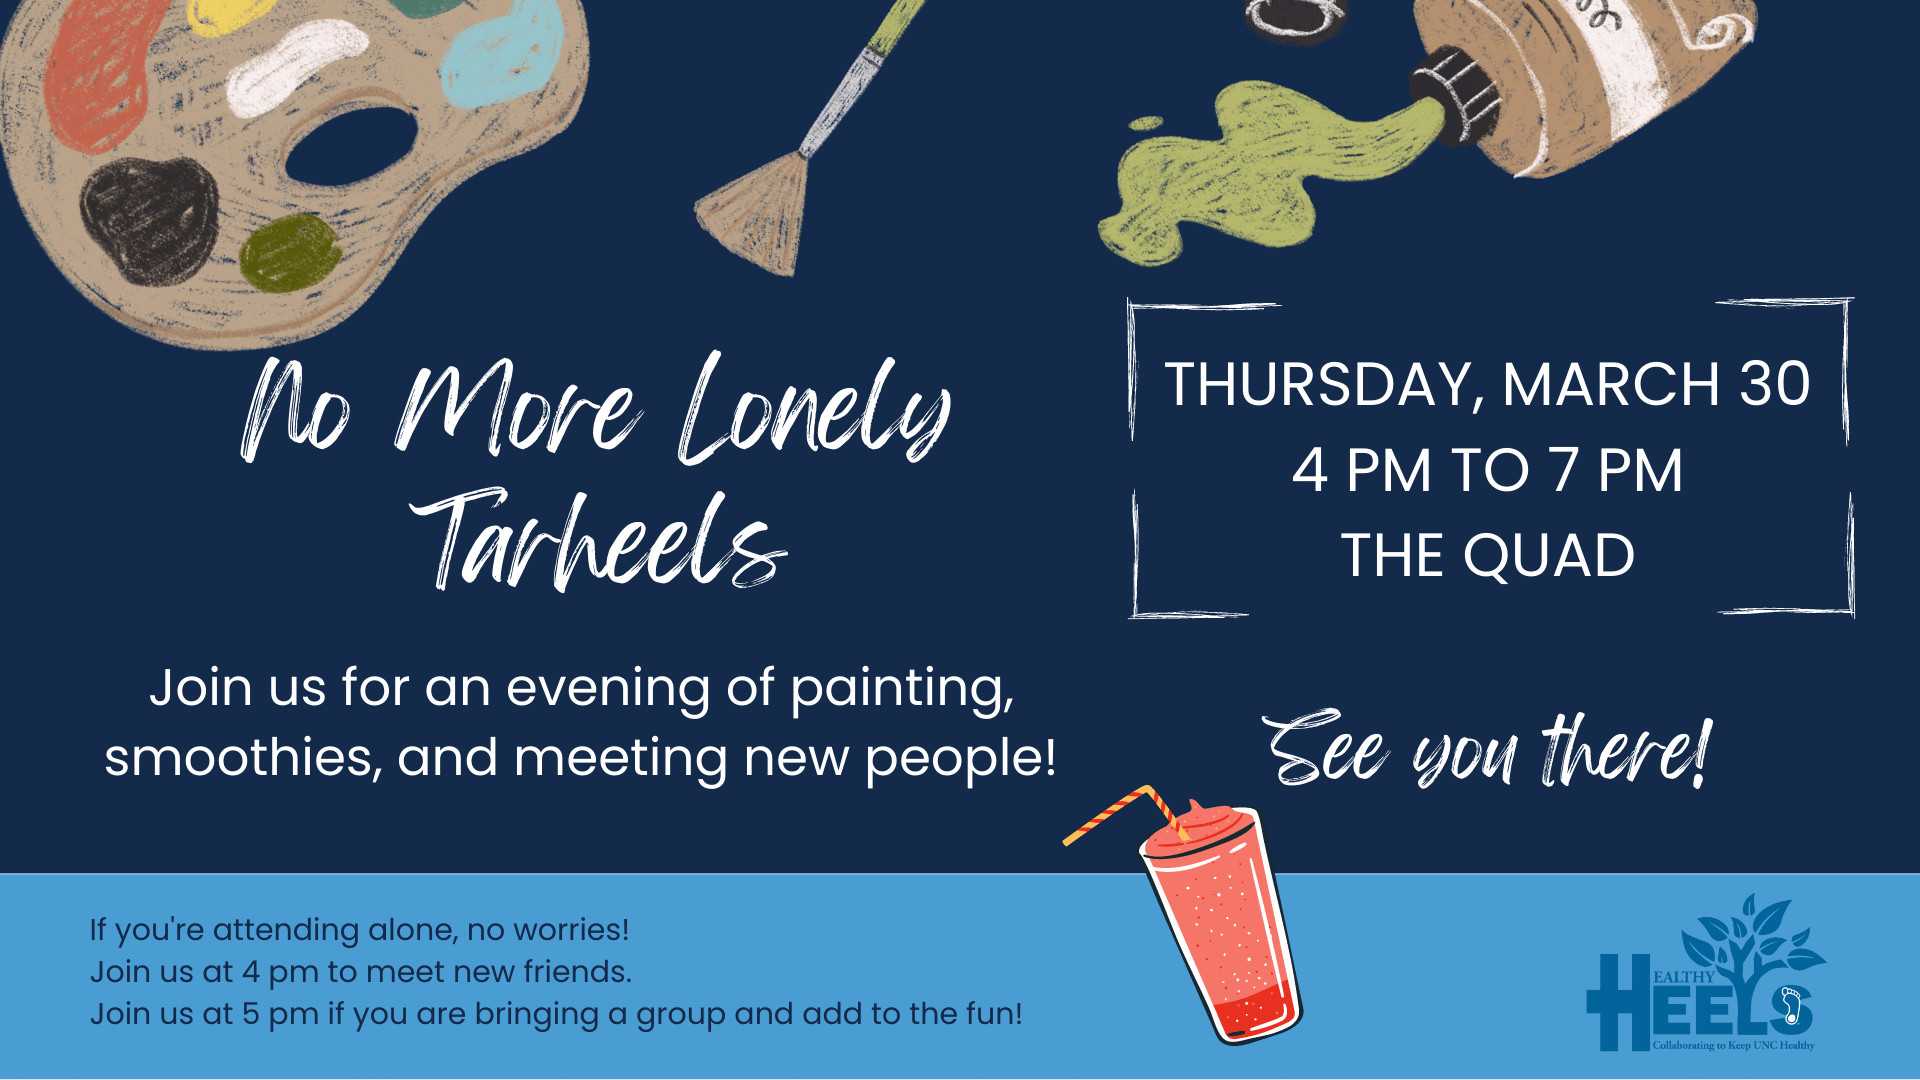 Join us for an evening of painting, smoothies, and meeting new people. Thursday 3/30 4pm-7pm on the quad